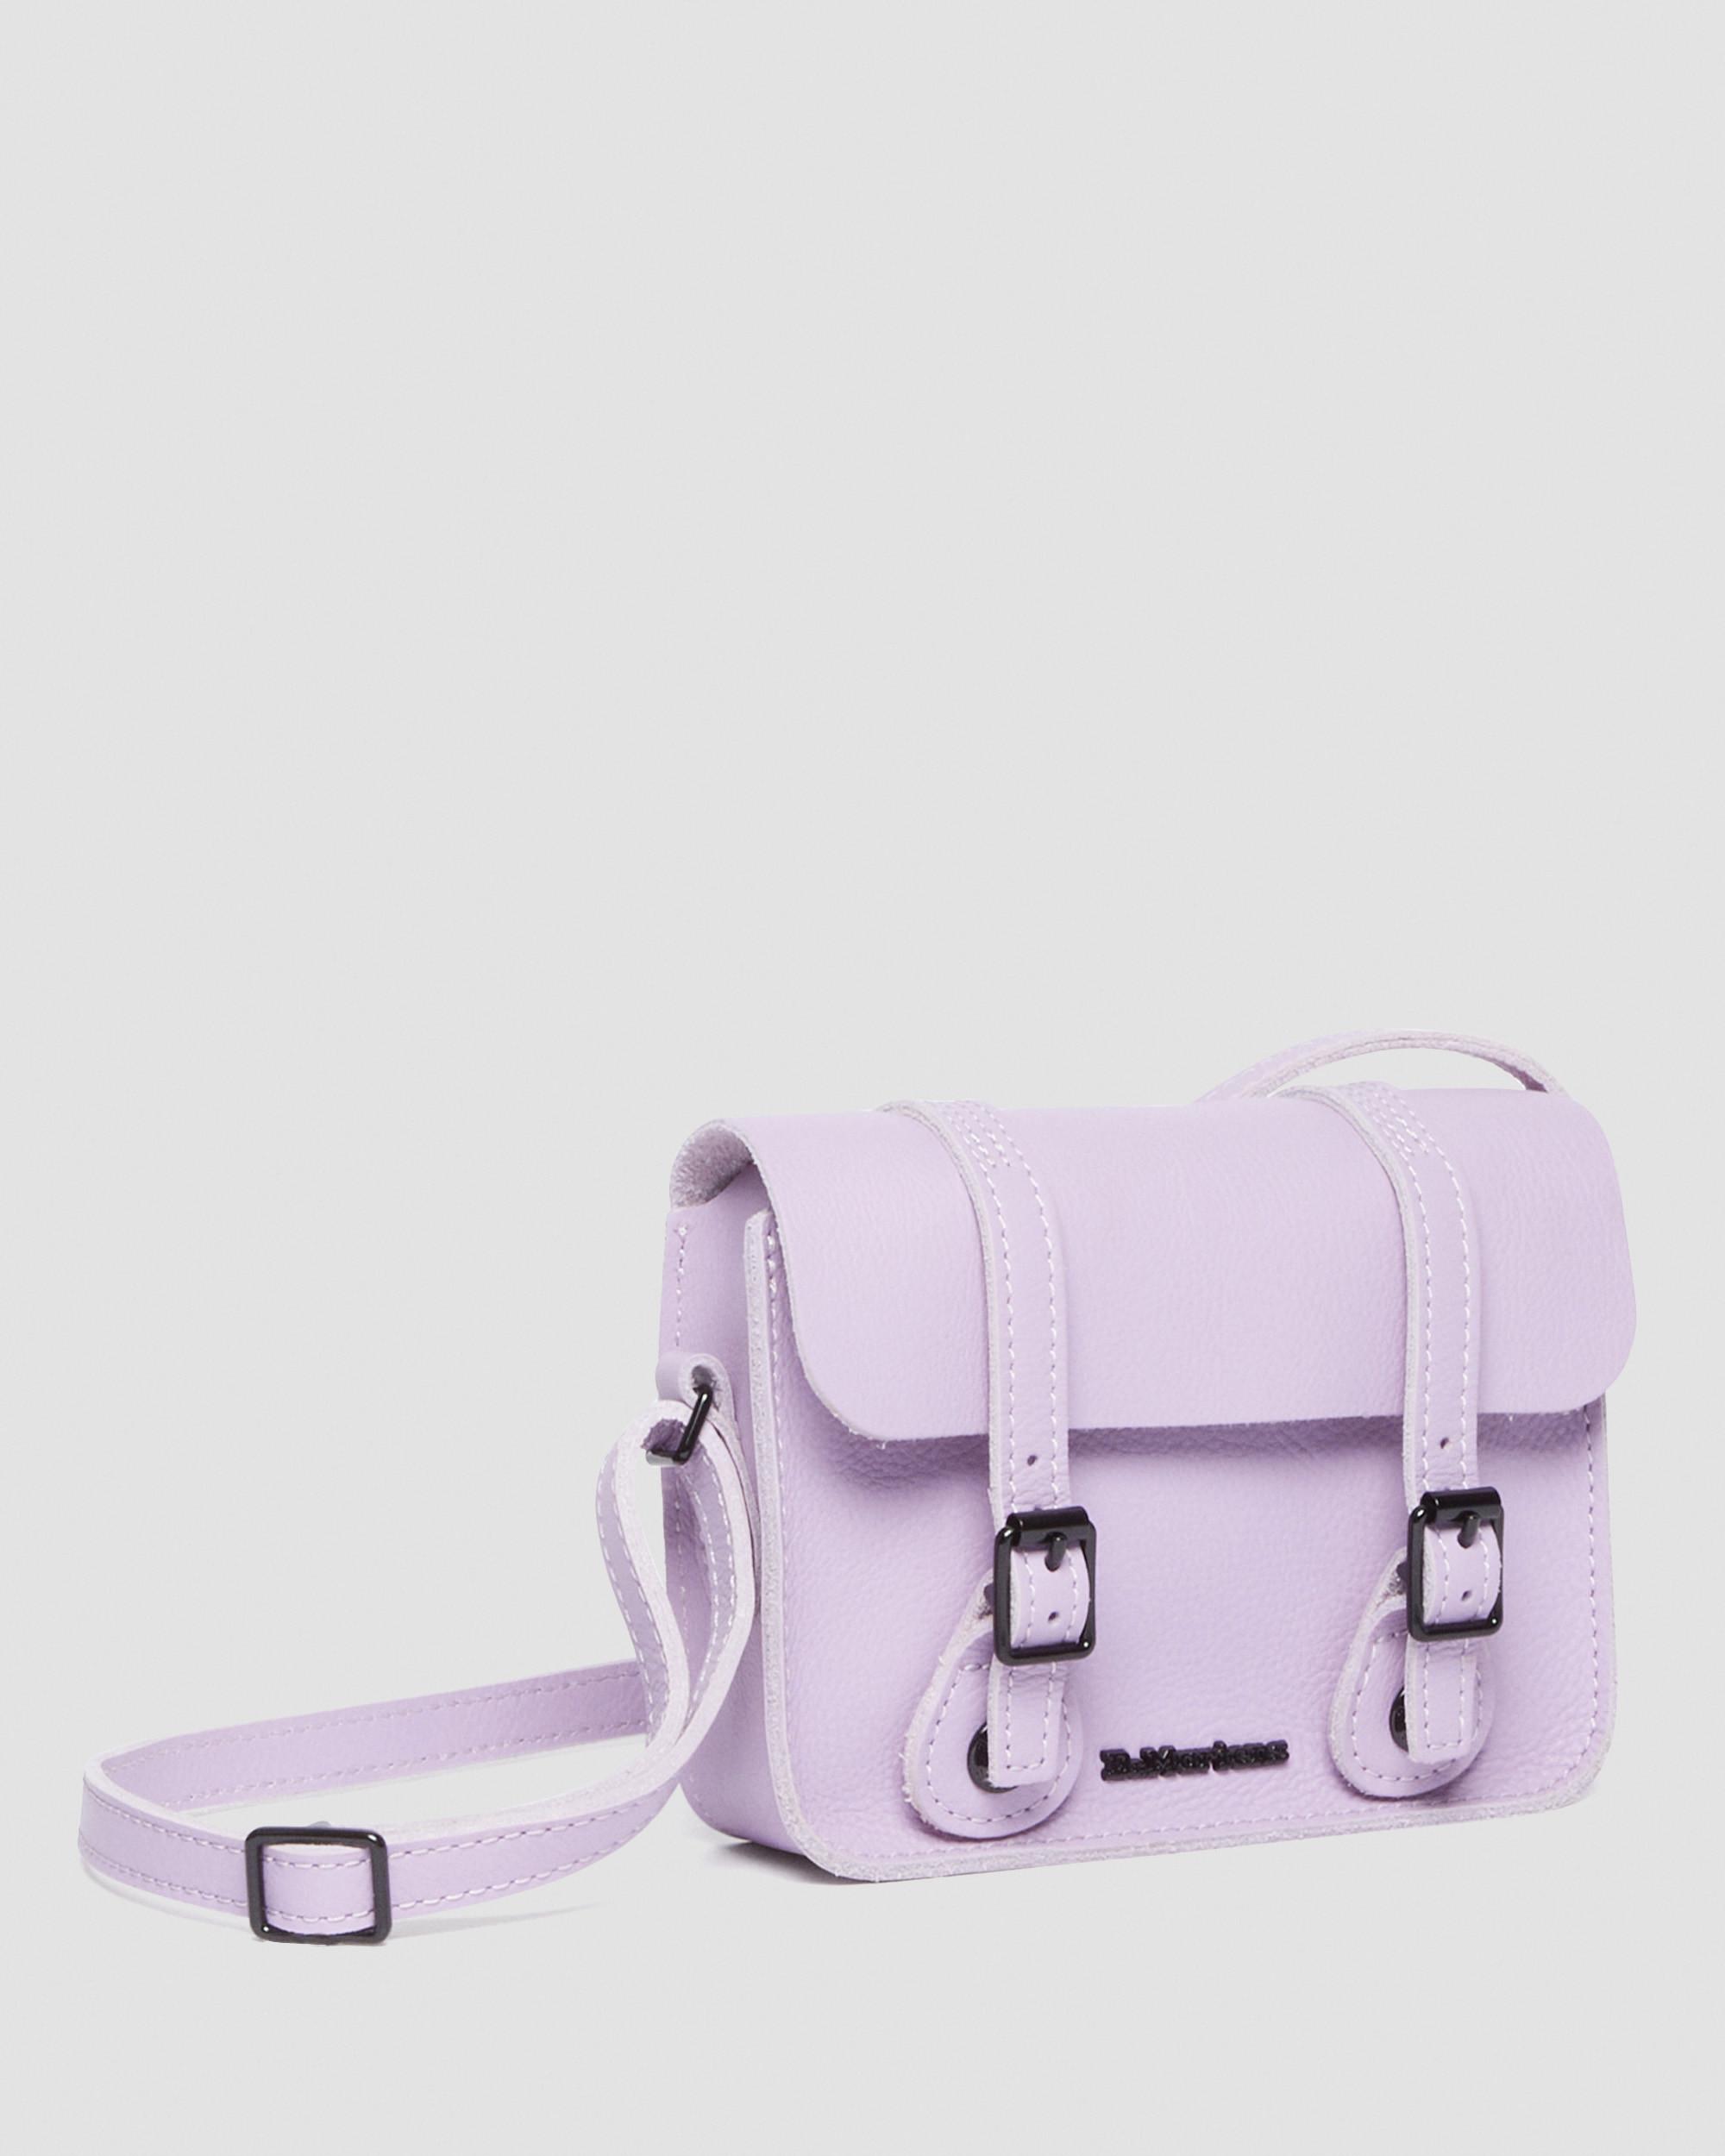 Dr. Martens 7 Inch Pisa Leather Crossbody Bag in Pink